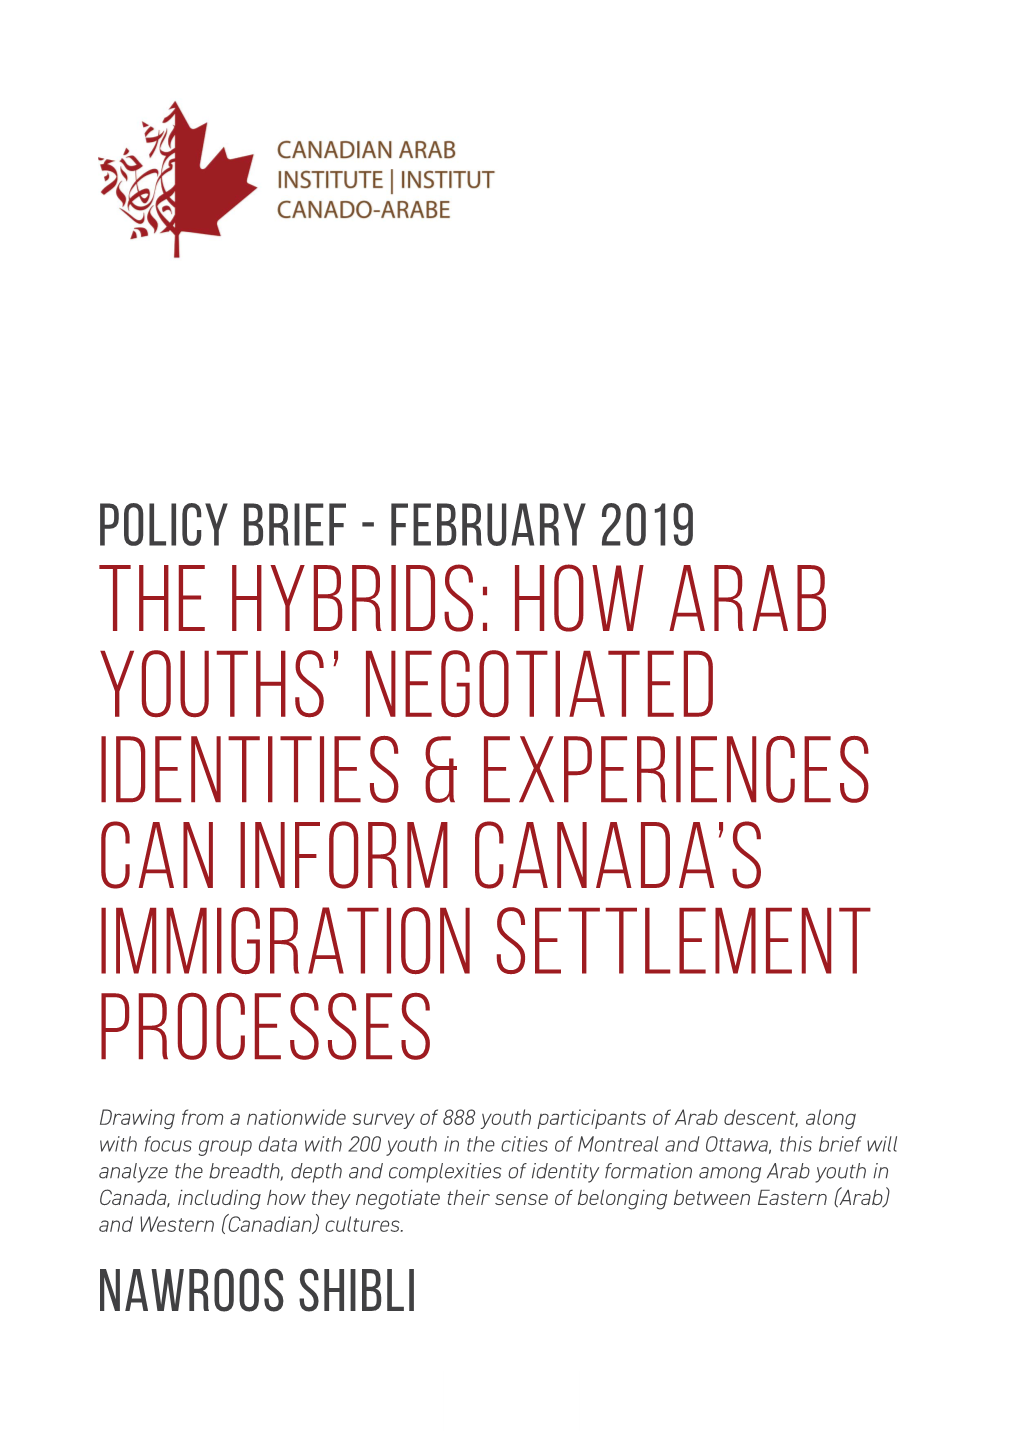 The Hybrids: How Arab Youths' Negotiated Identities & Experiences